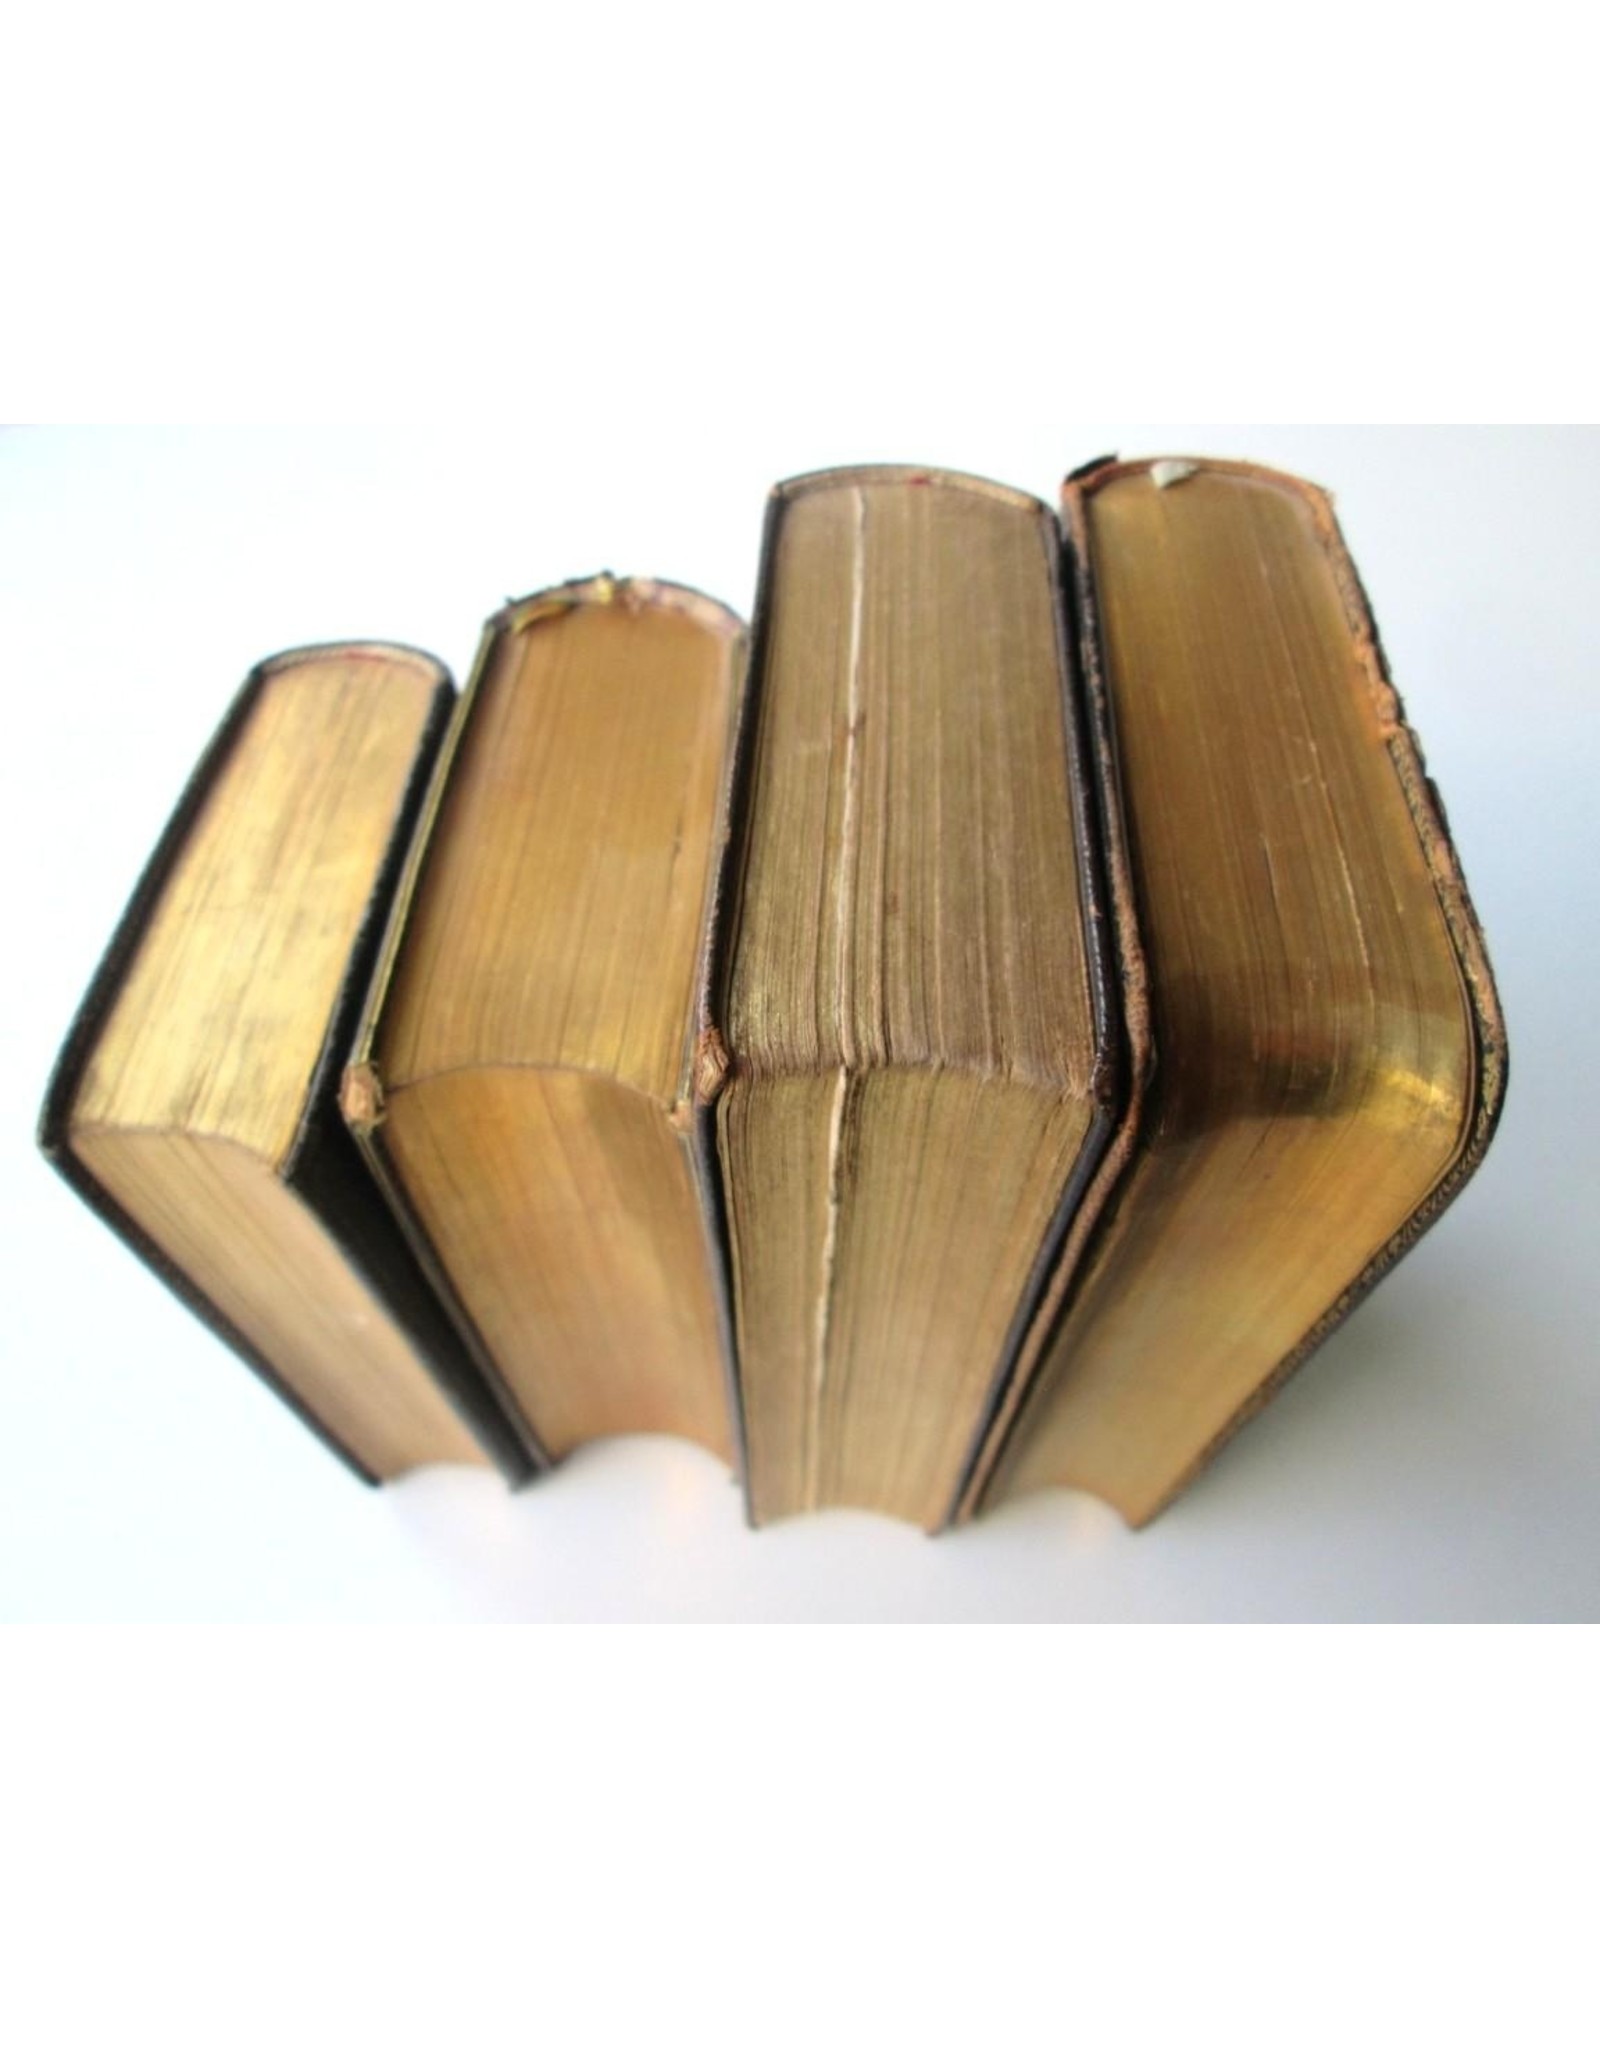 Book bindings] Lot with 4 old French prayer books - Arcana Cabana